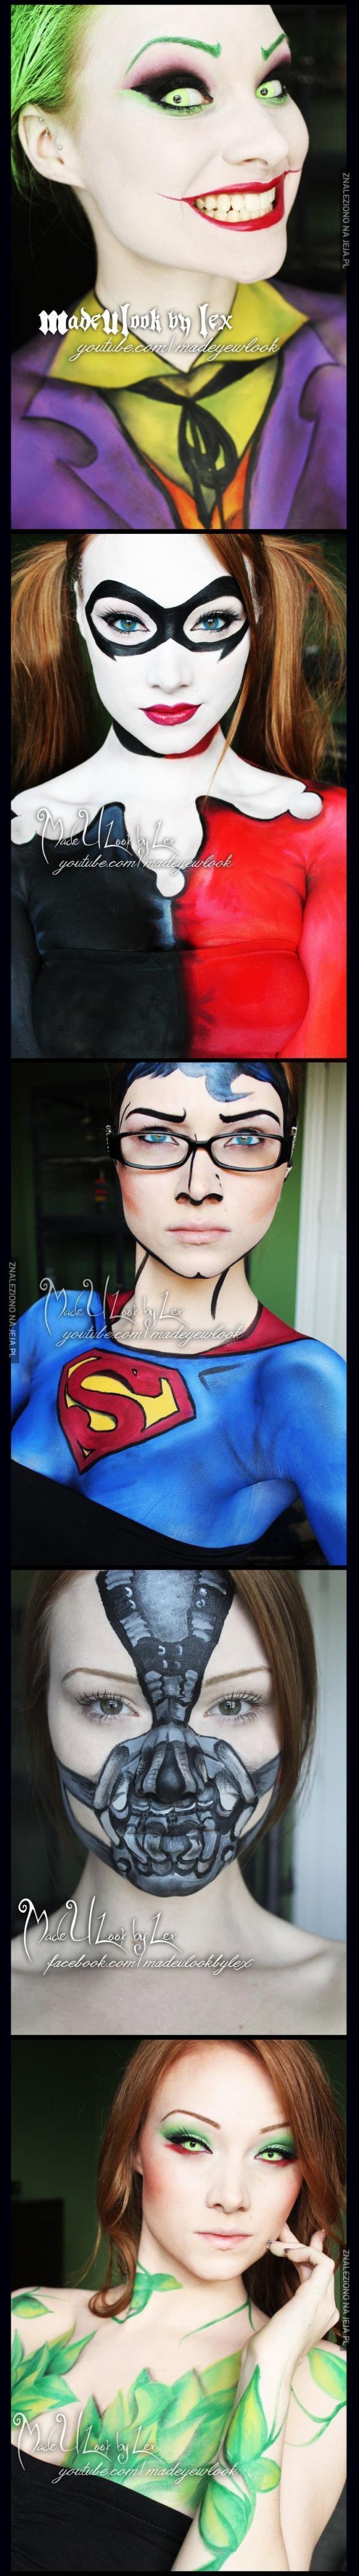 Cosplay body painting